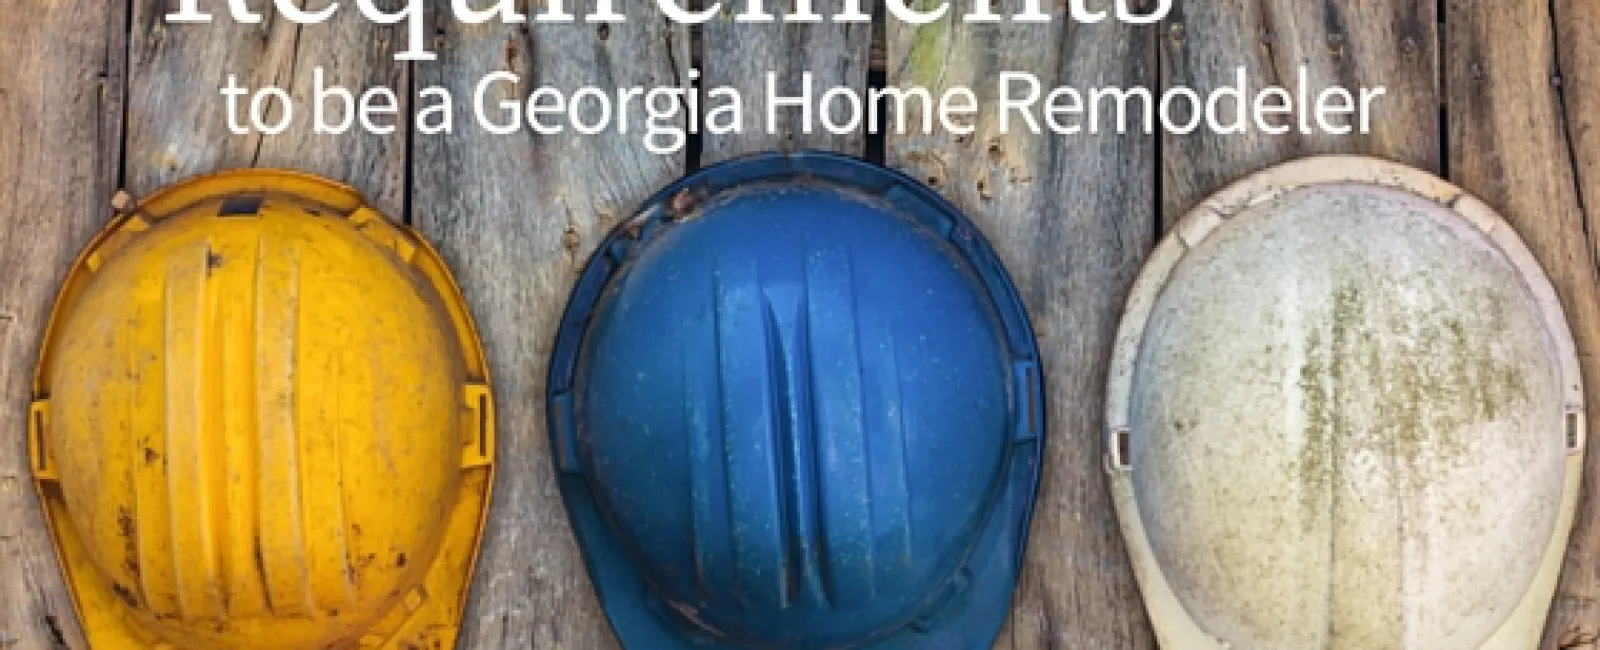 Requirements of a Georgia Home Remodeler